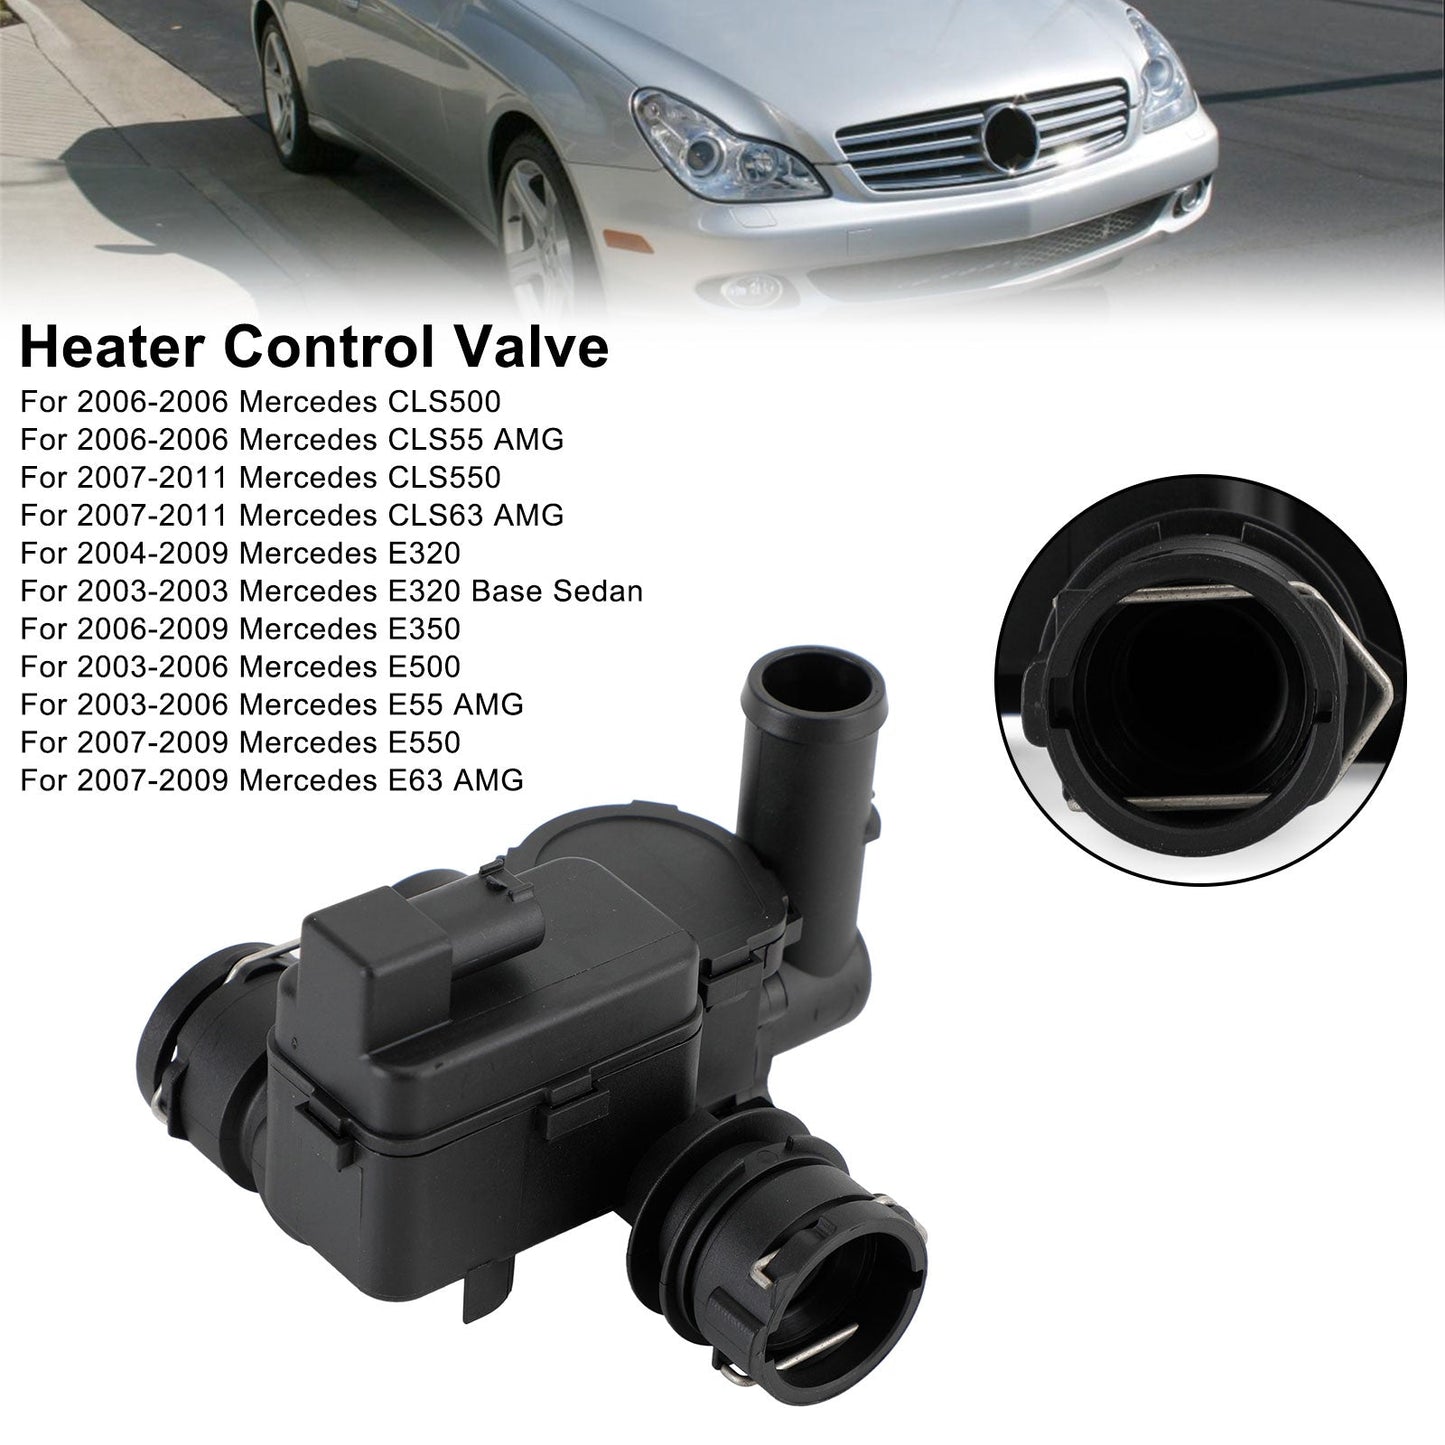 Heater Control Valve Solenoid 2118320684 For Mercedes C215 CLS500 CLS550 W211